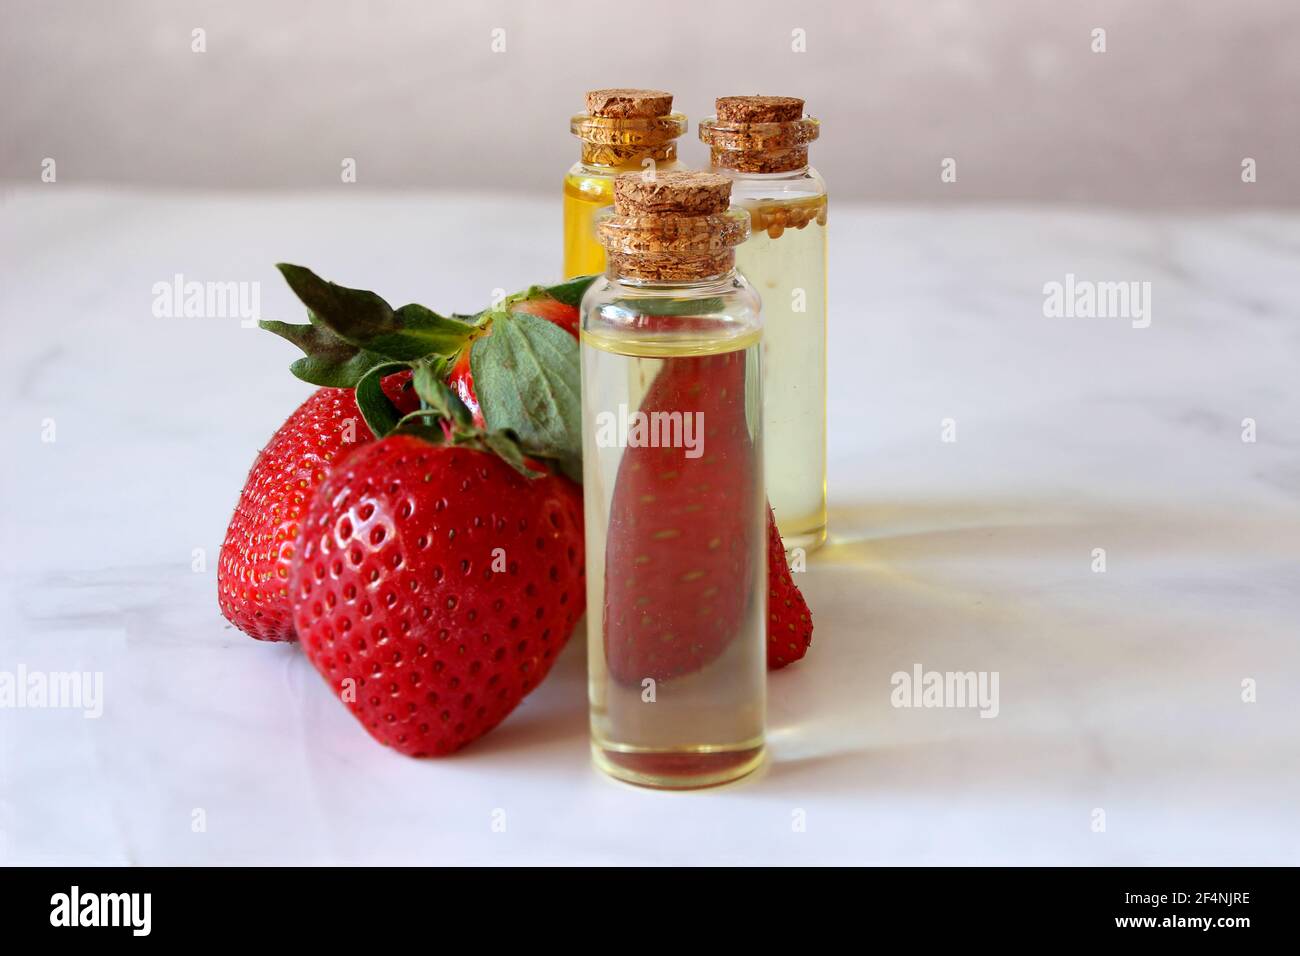 aroma and flavor enhancer next to ripe strawberries, on light background. Stock Photo